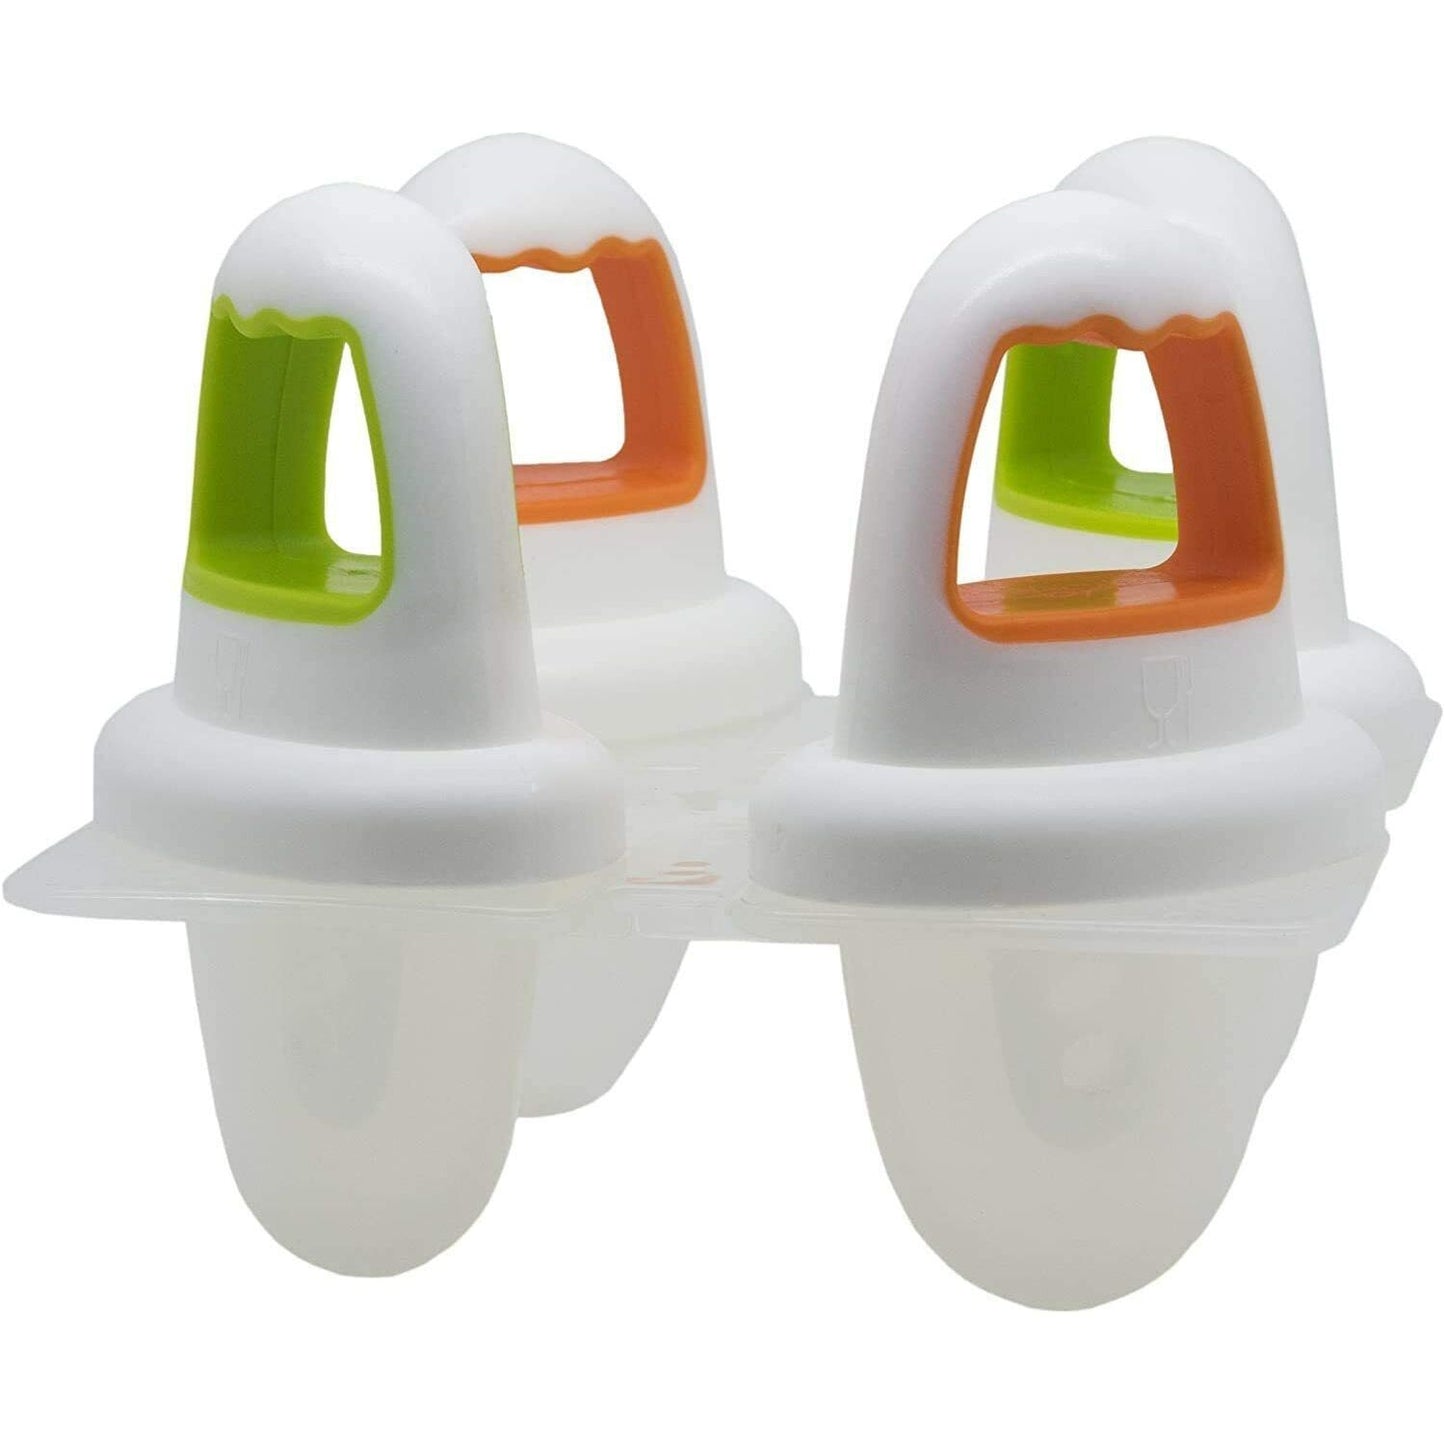 NUK Mini Ice Lolly Moulds Great for Teething Fruit Lollies Freeze 4 Count